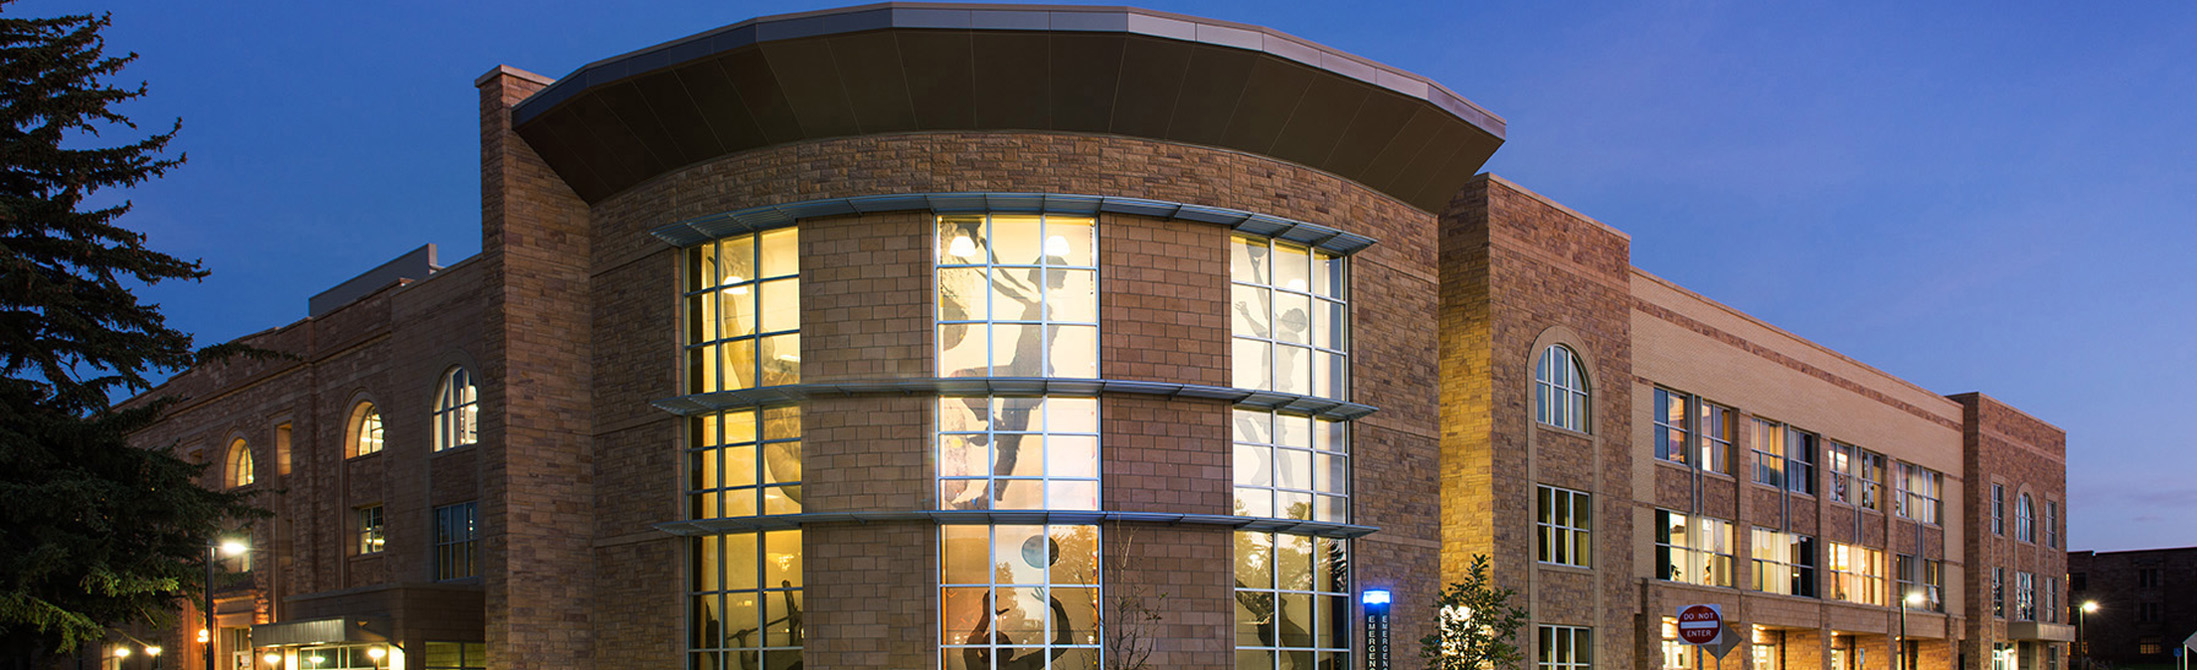 Half Acre Gym Exterior at Night